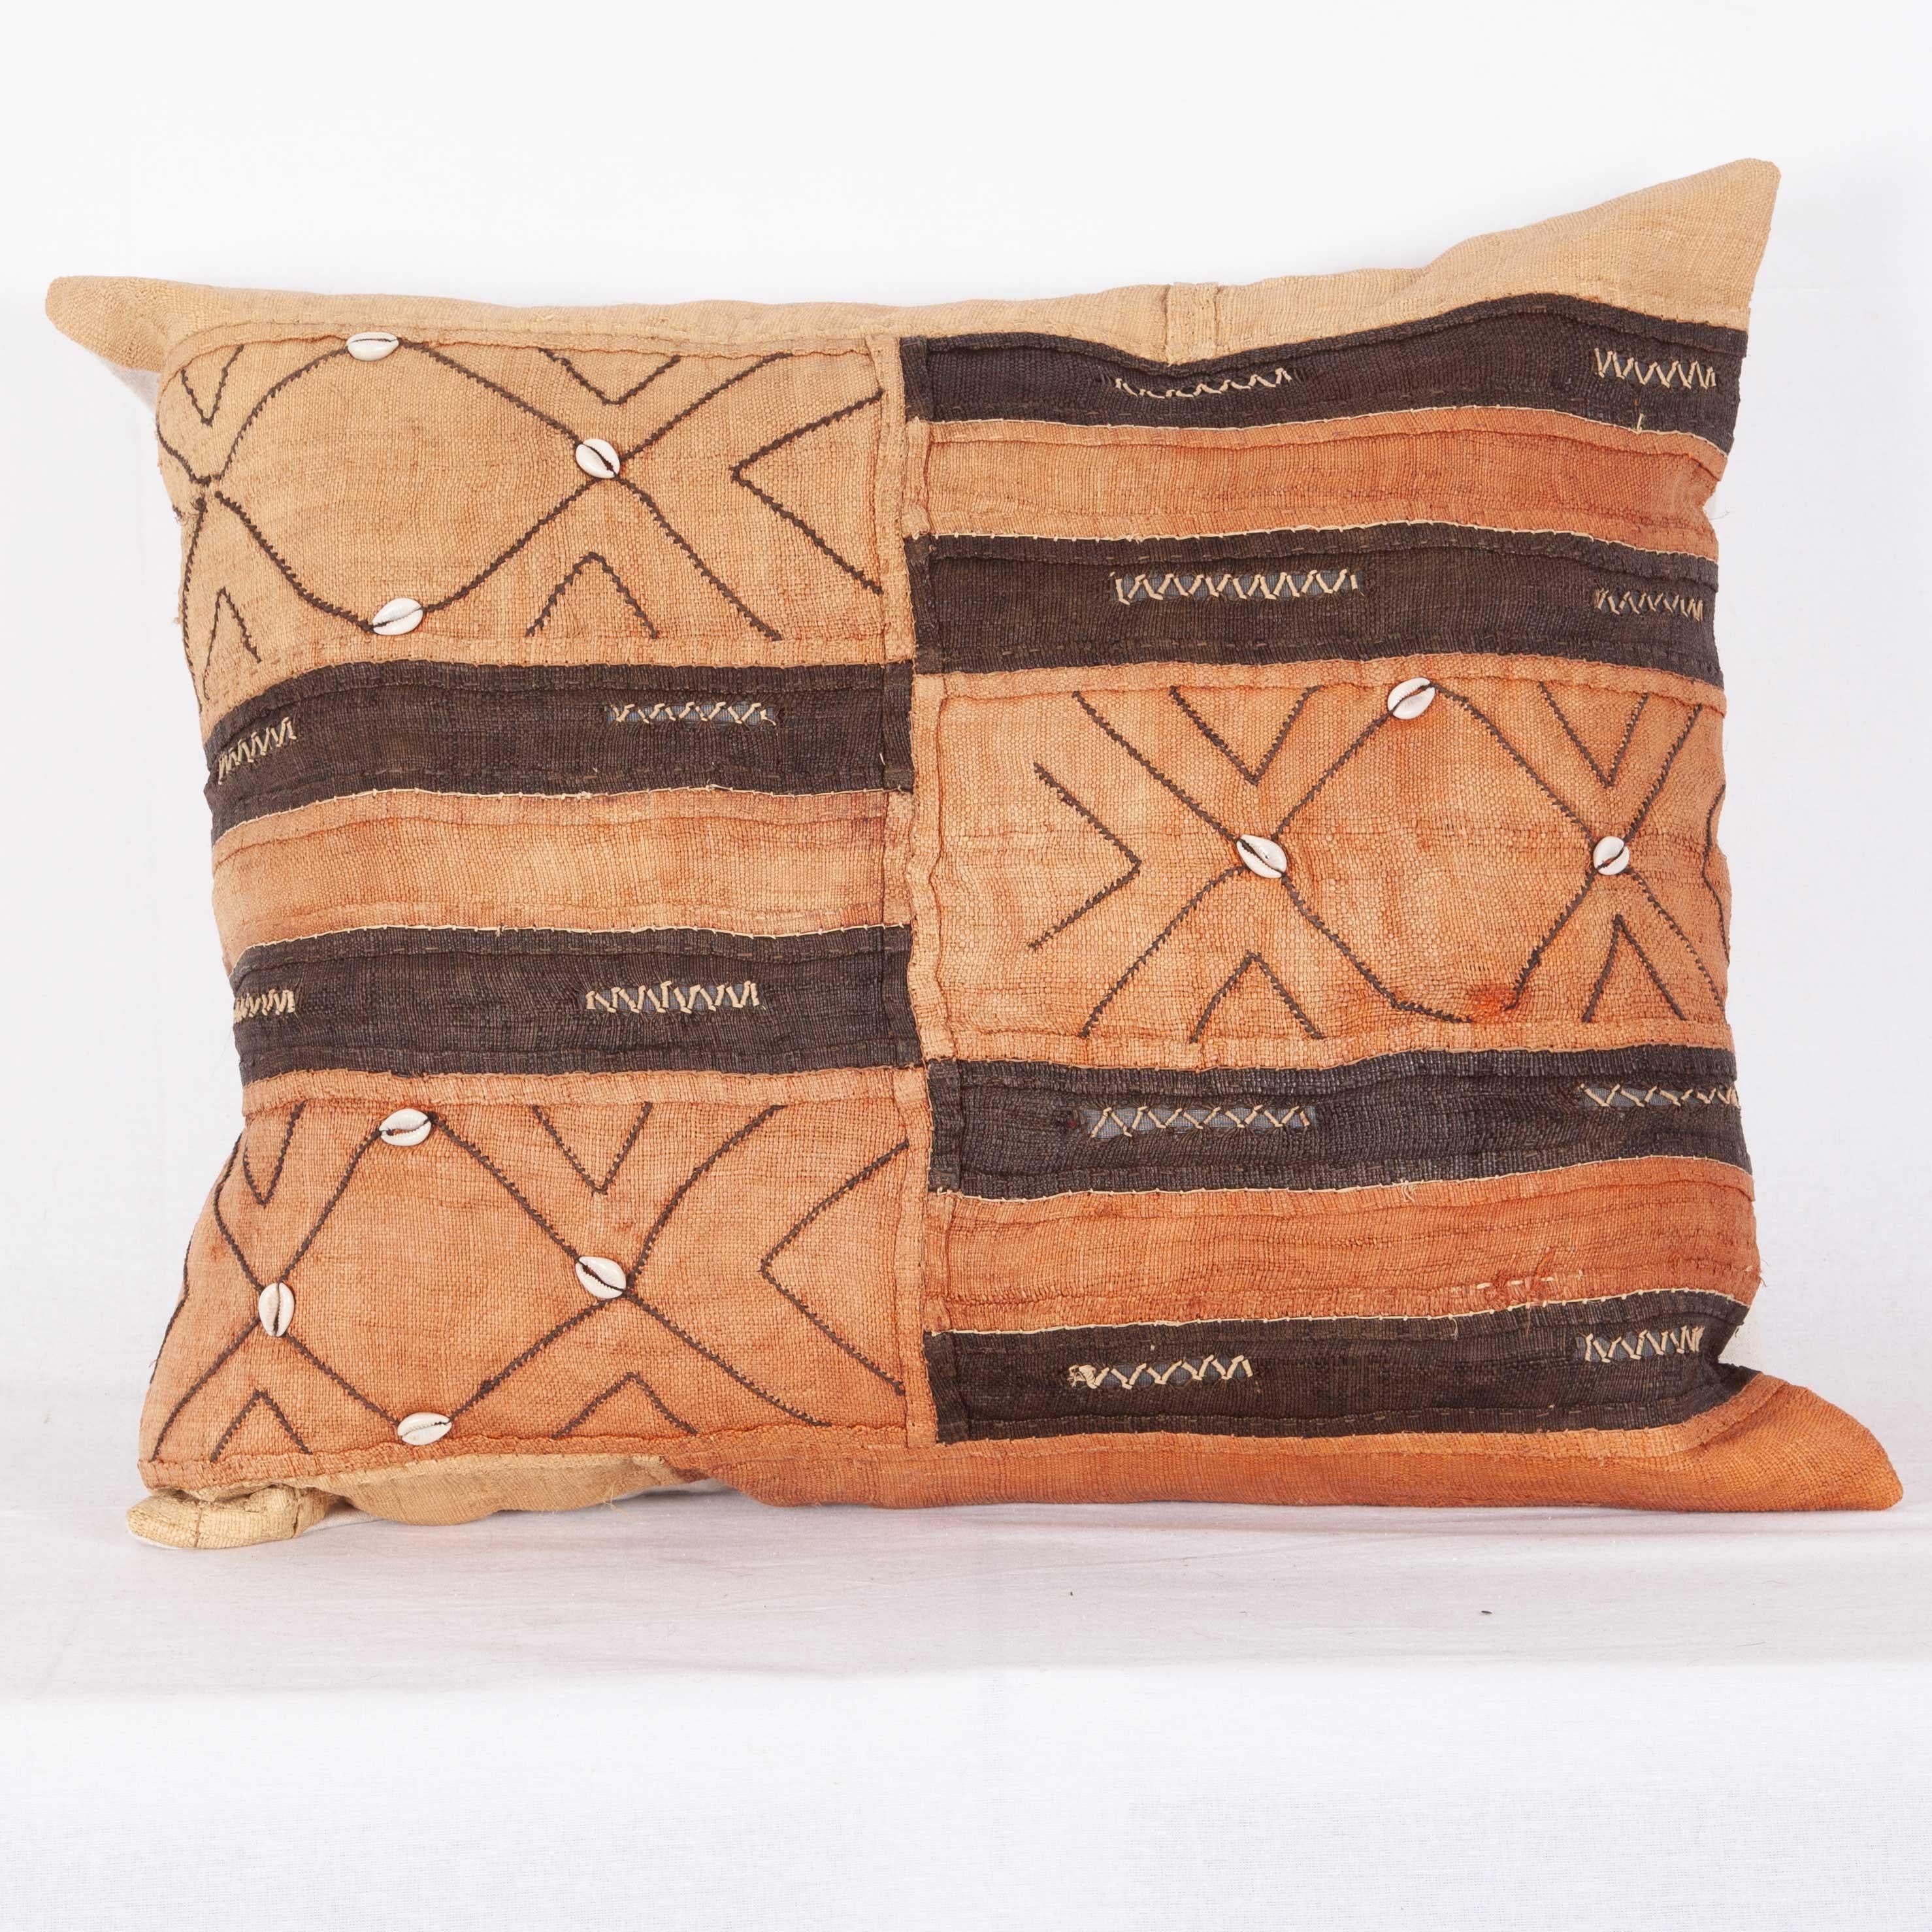 Vintage African Kuba Cloth Pillow Cases, Mid-20th Century For Sale 2